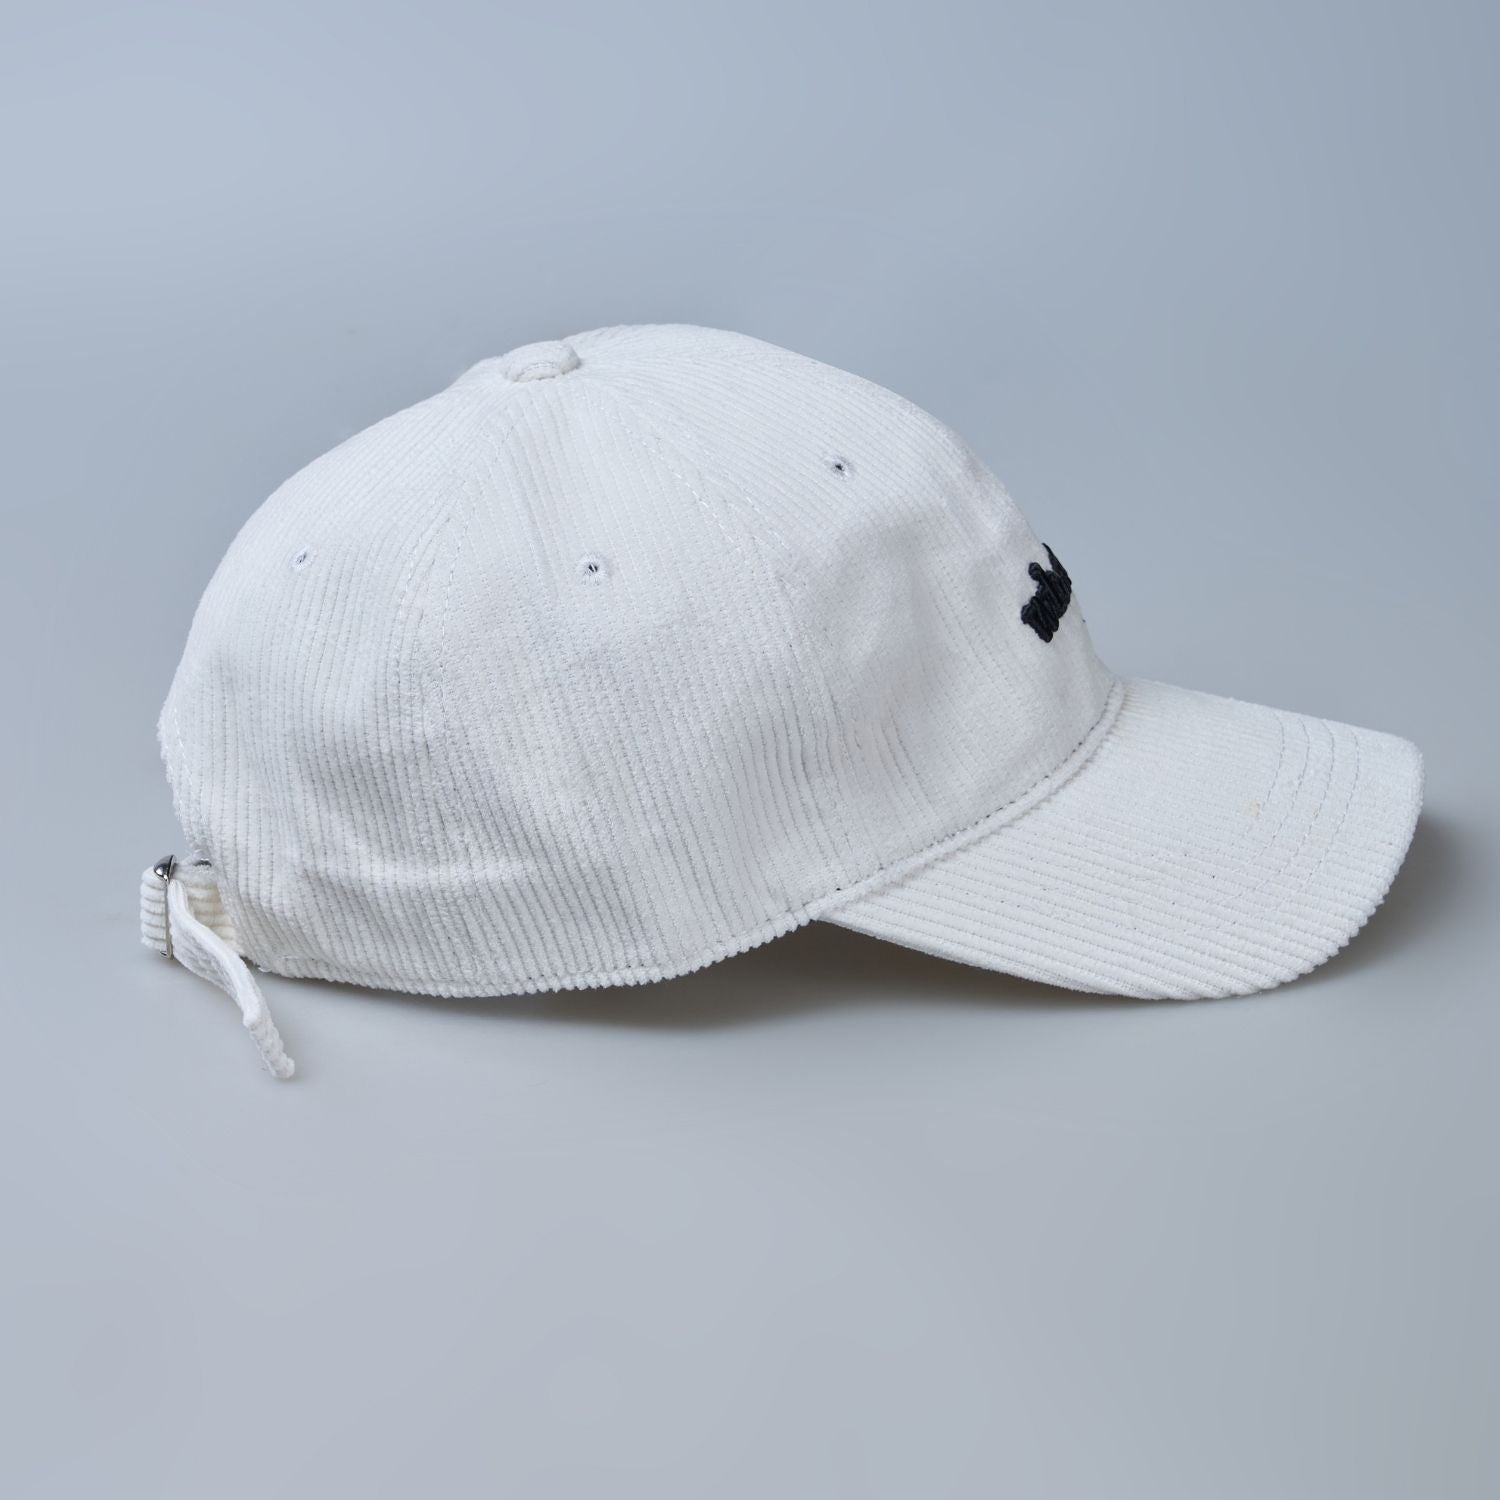 White colored cap for men with 'what' text written on it, side design detail.